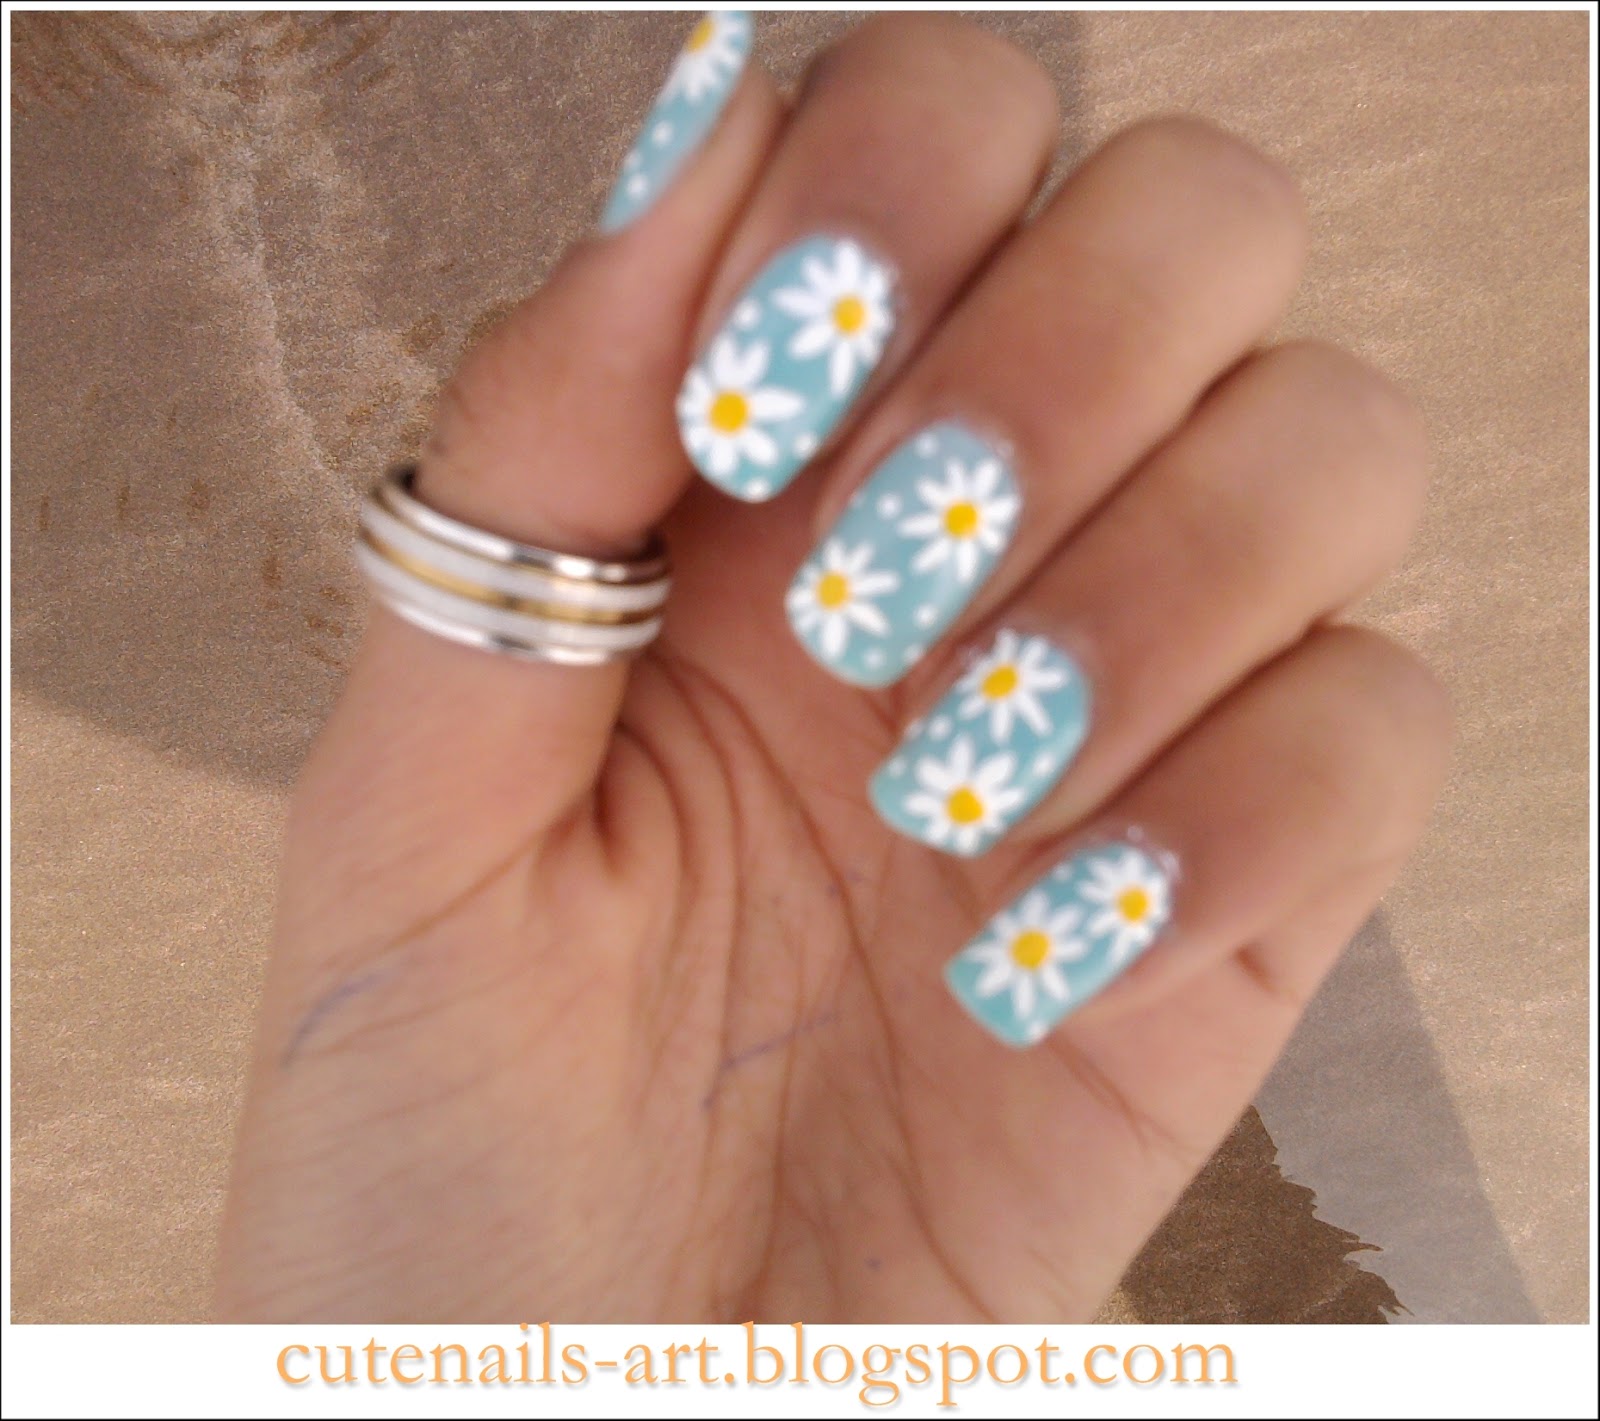 ... to start the spring series of nail art whit a daisy flowers nail art